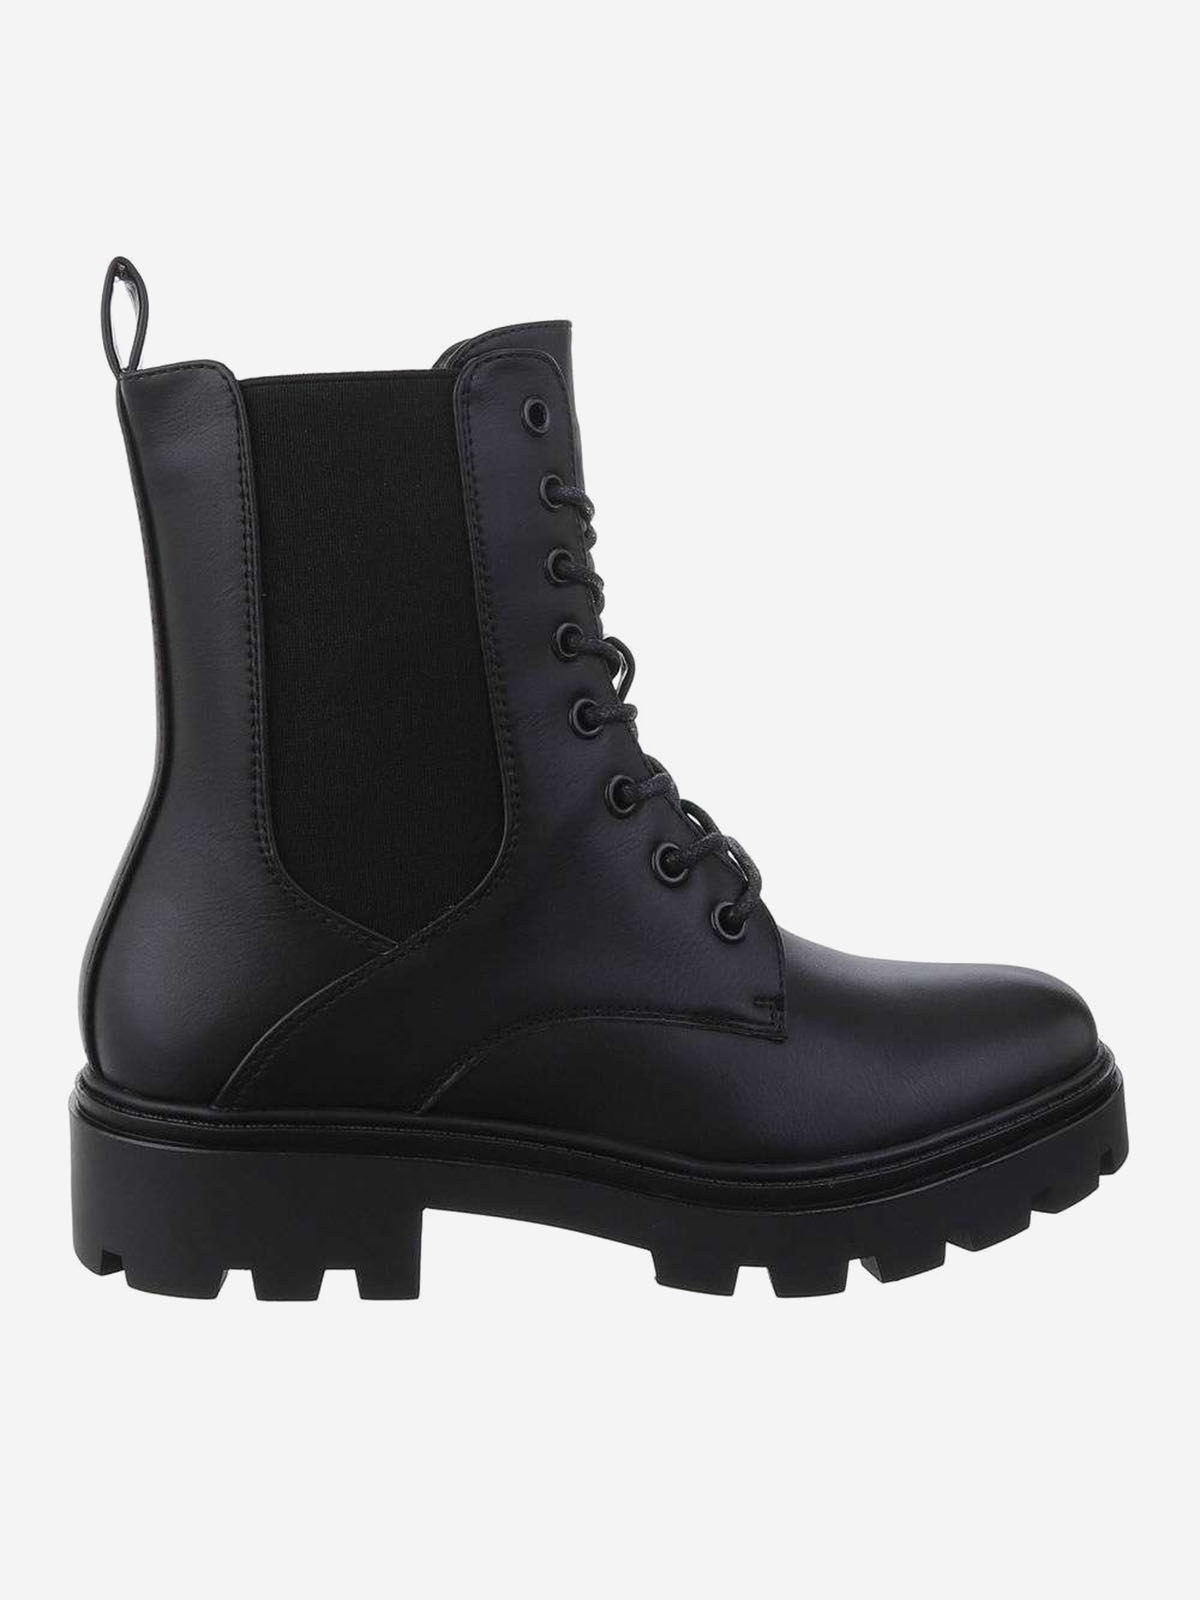 Classic women's ankle boots in black